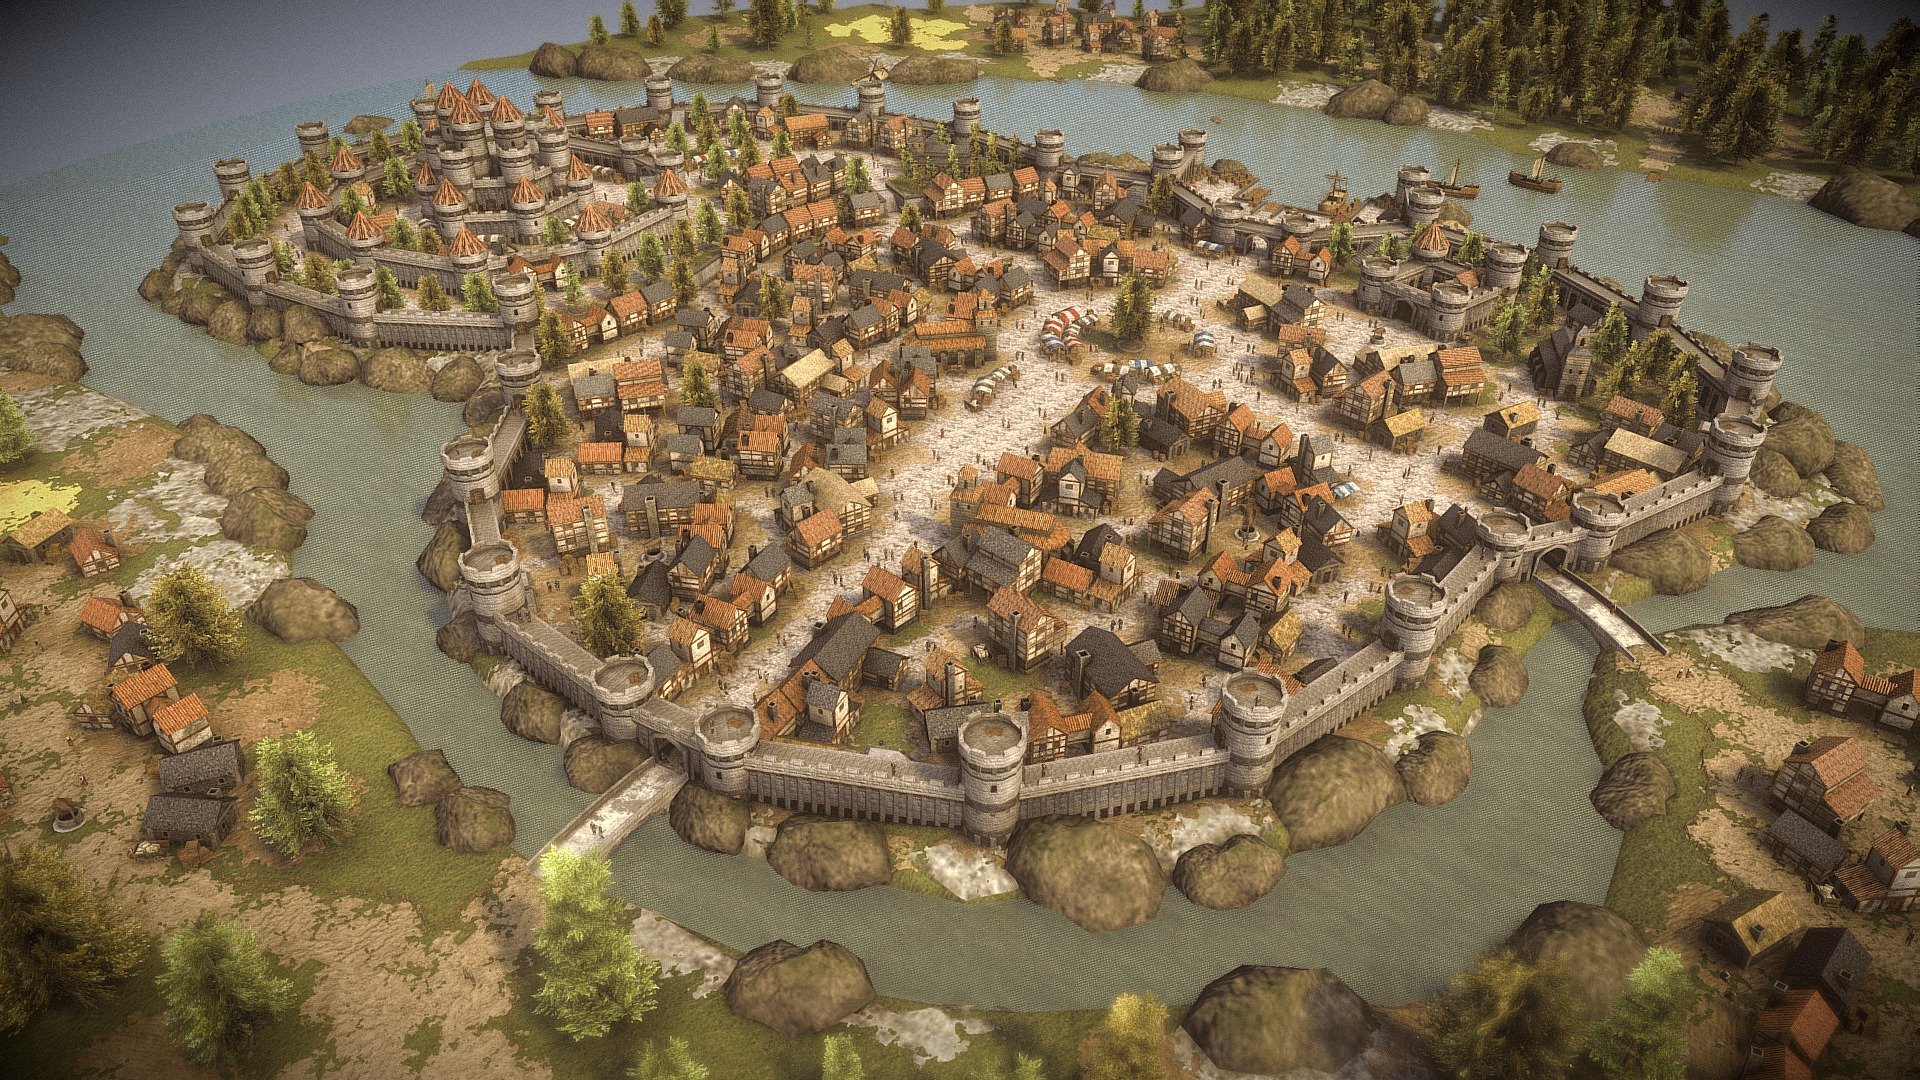 This city was created as a demo of my Medieval City Low Poly Pack, which can be purchased here: https://skfb.ly/6FKTU

Every single asset used in this environment comes from that pack. It uses 4 different materials (five if we count the water, as it was separated for manual opacity control), each one with Albedo, Roughness, Normal, AO, Metallic and Opacity maps. Most textures (Environment, People and Market) are 1024x1024, and the one cotaining all the buildings is 2048x2048. Also, most of the details are contained on the normal map, resulting in a low poly count. Even if the scene reaches over 500k polys, keep in mind the size of the city.

As for this scene, it has been something I've wanted to create for so many years, and I finally decided to make it with the pack. It even works as an UE4 level. I hope you like it! :D - Medieval City Pack Demo - 3D model by Ivanix88 3d model